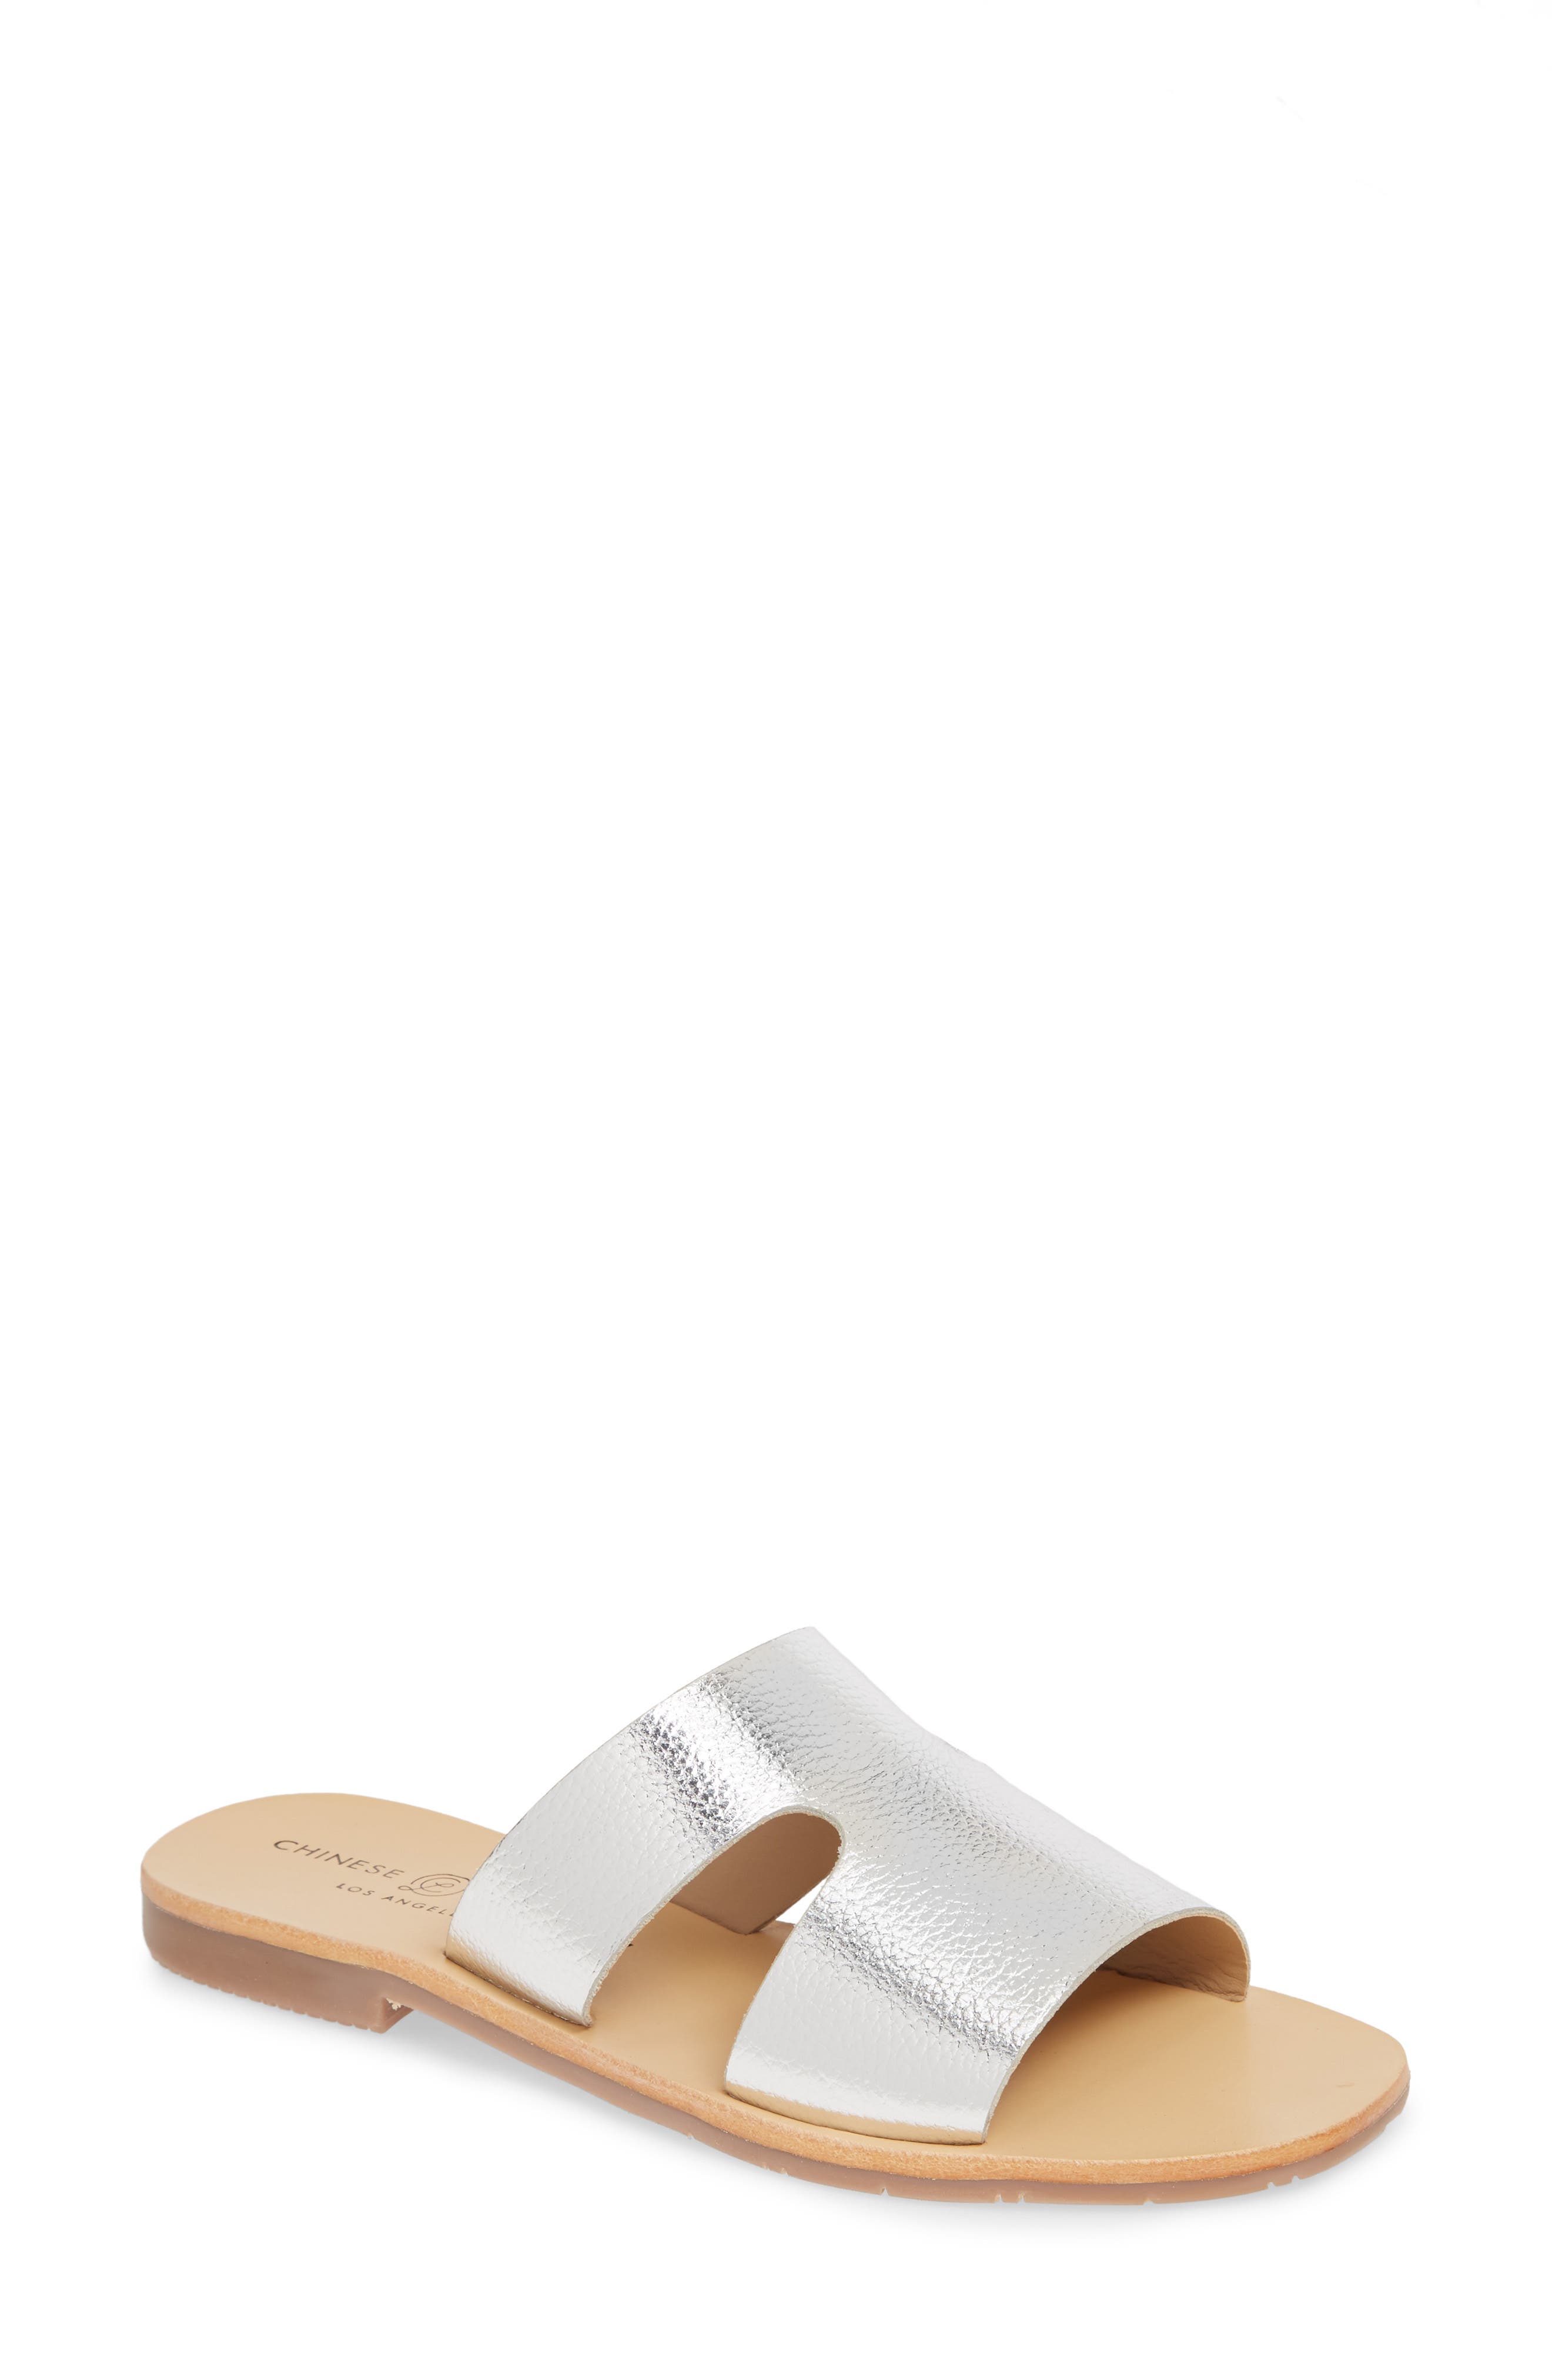 Chinese Laundry Mannie Slide Sandal in Silver Leather